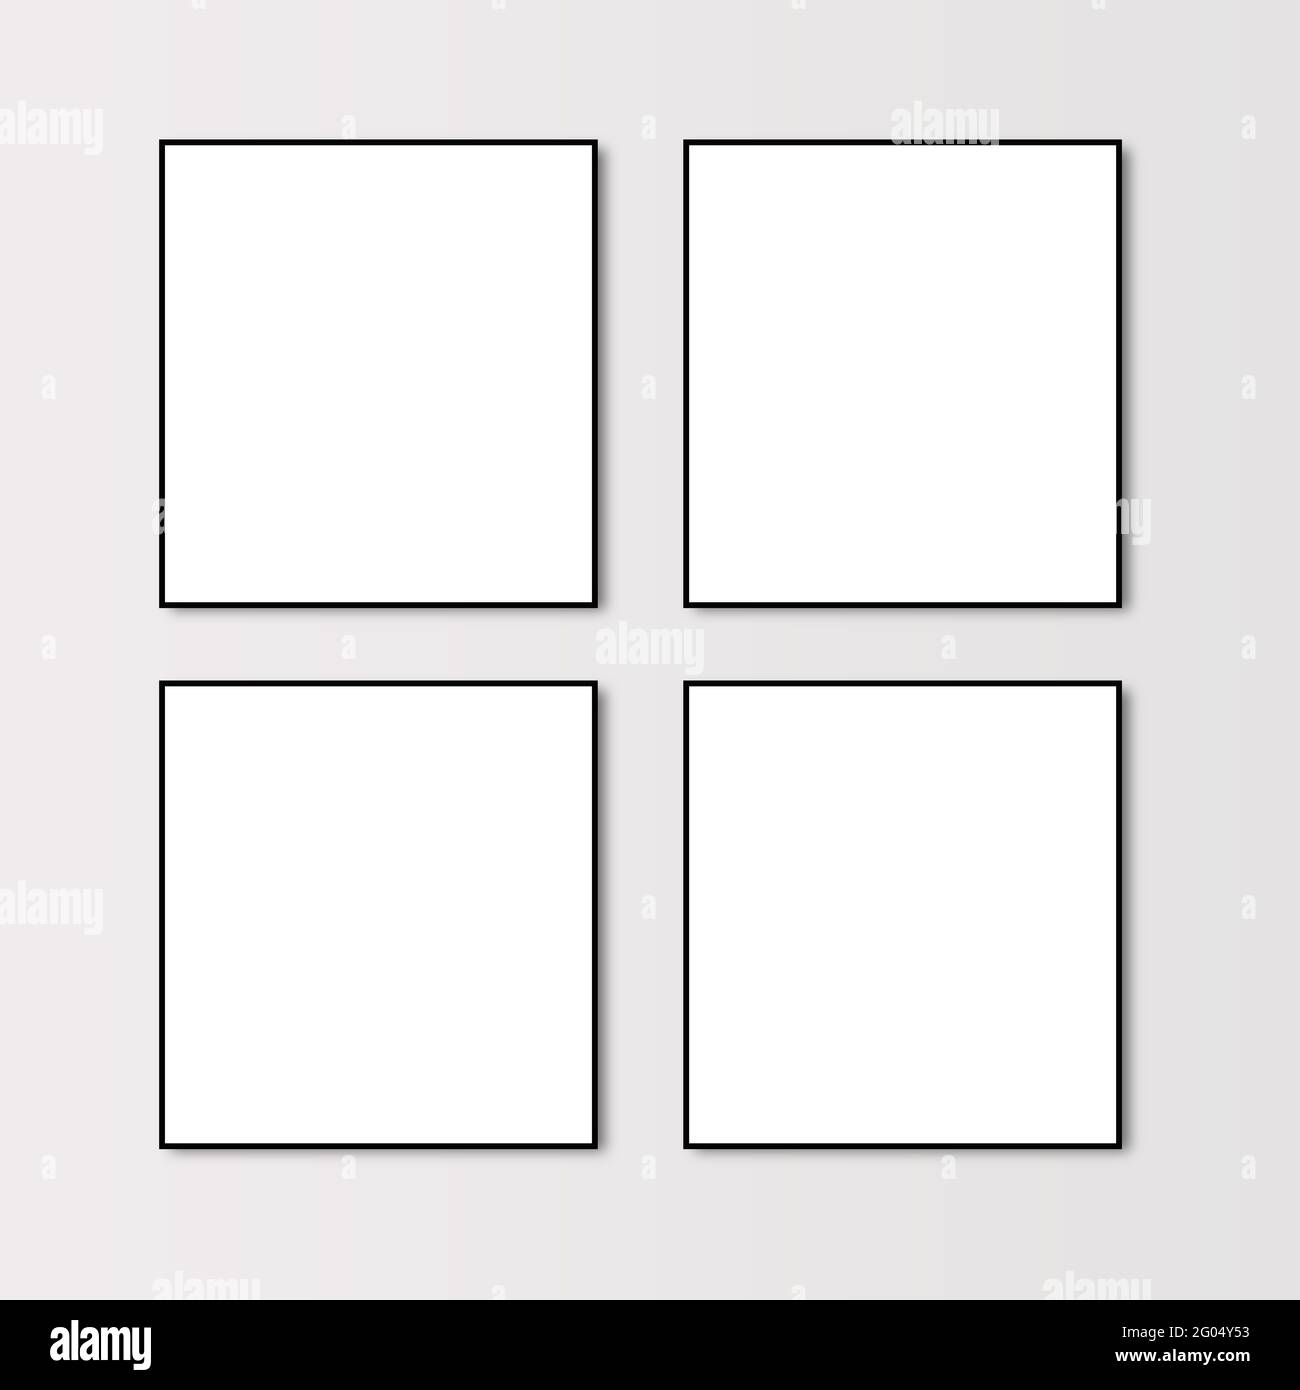 Four foto Frames square hanging in clean grey white gradient wall, 4 picture frame mockups with black borders. empty white album blanks for photos Stock Photo